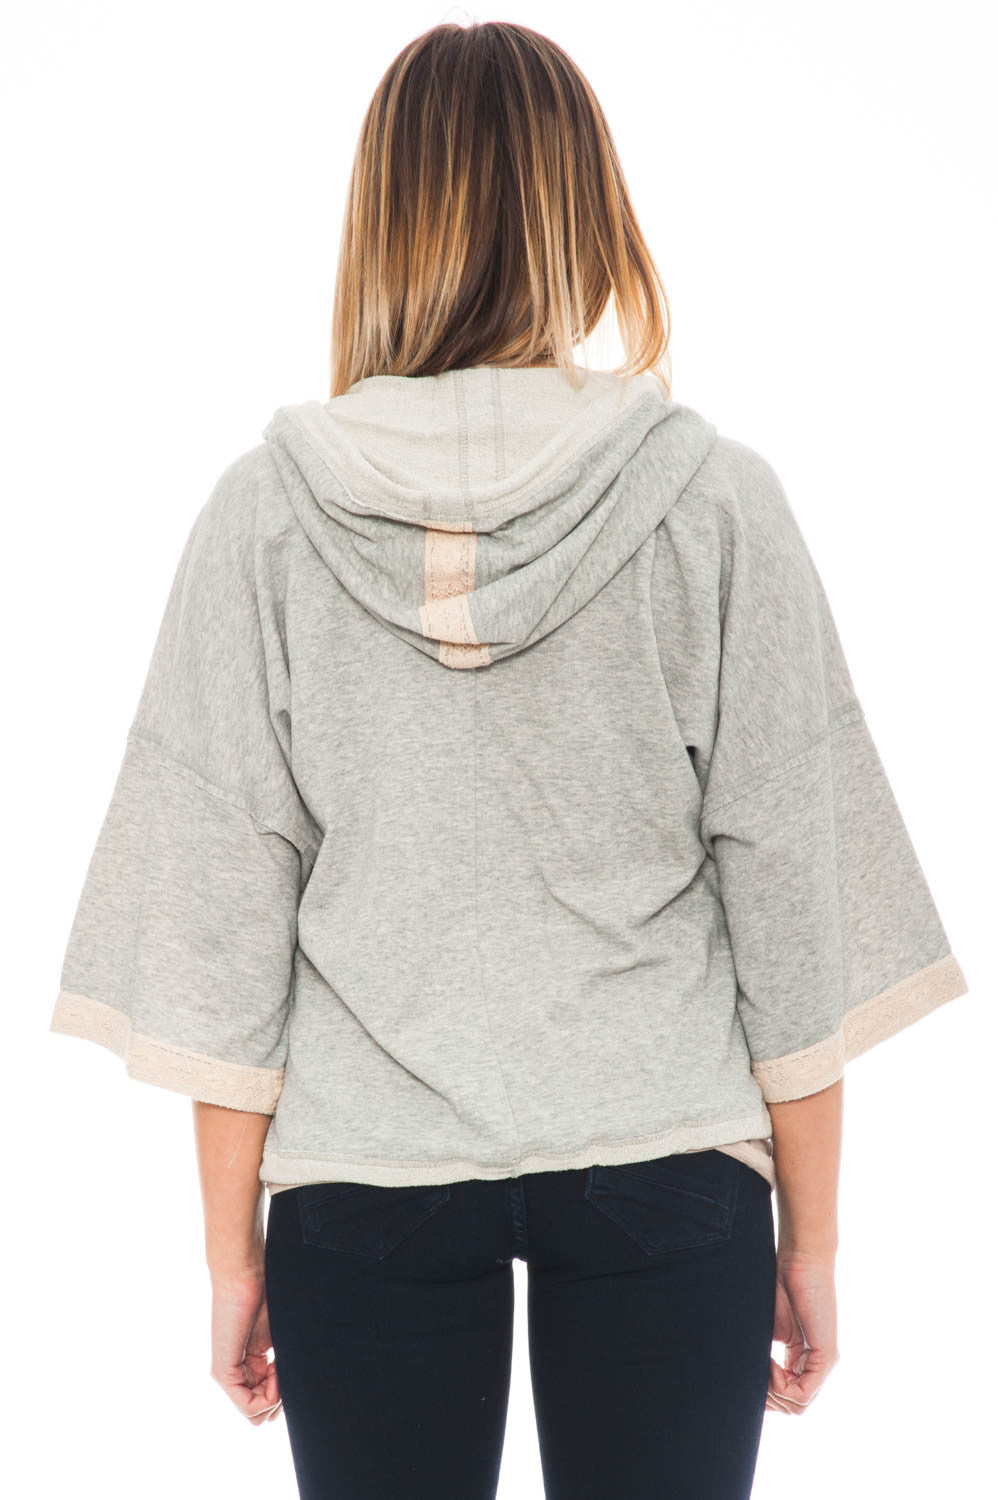 Sweater - 3/4 Sleeve Hooded Sweatshirt with a Bell Sleeve By Democracy